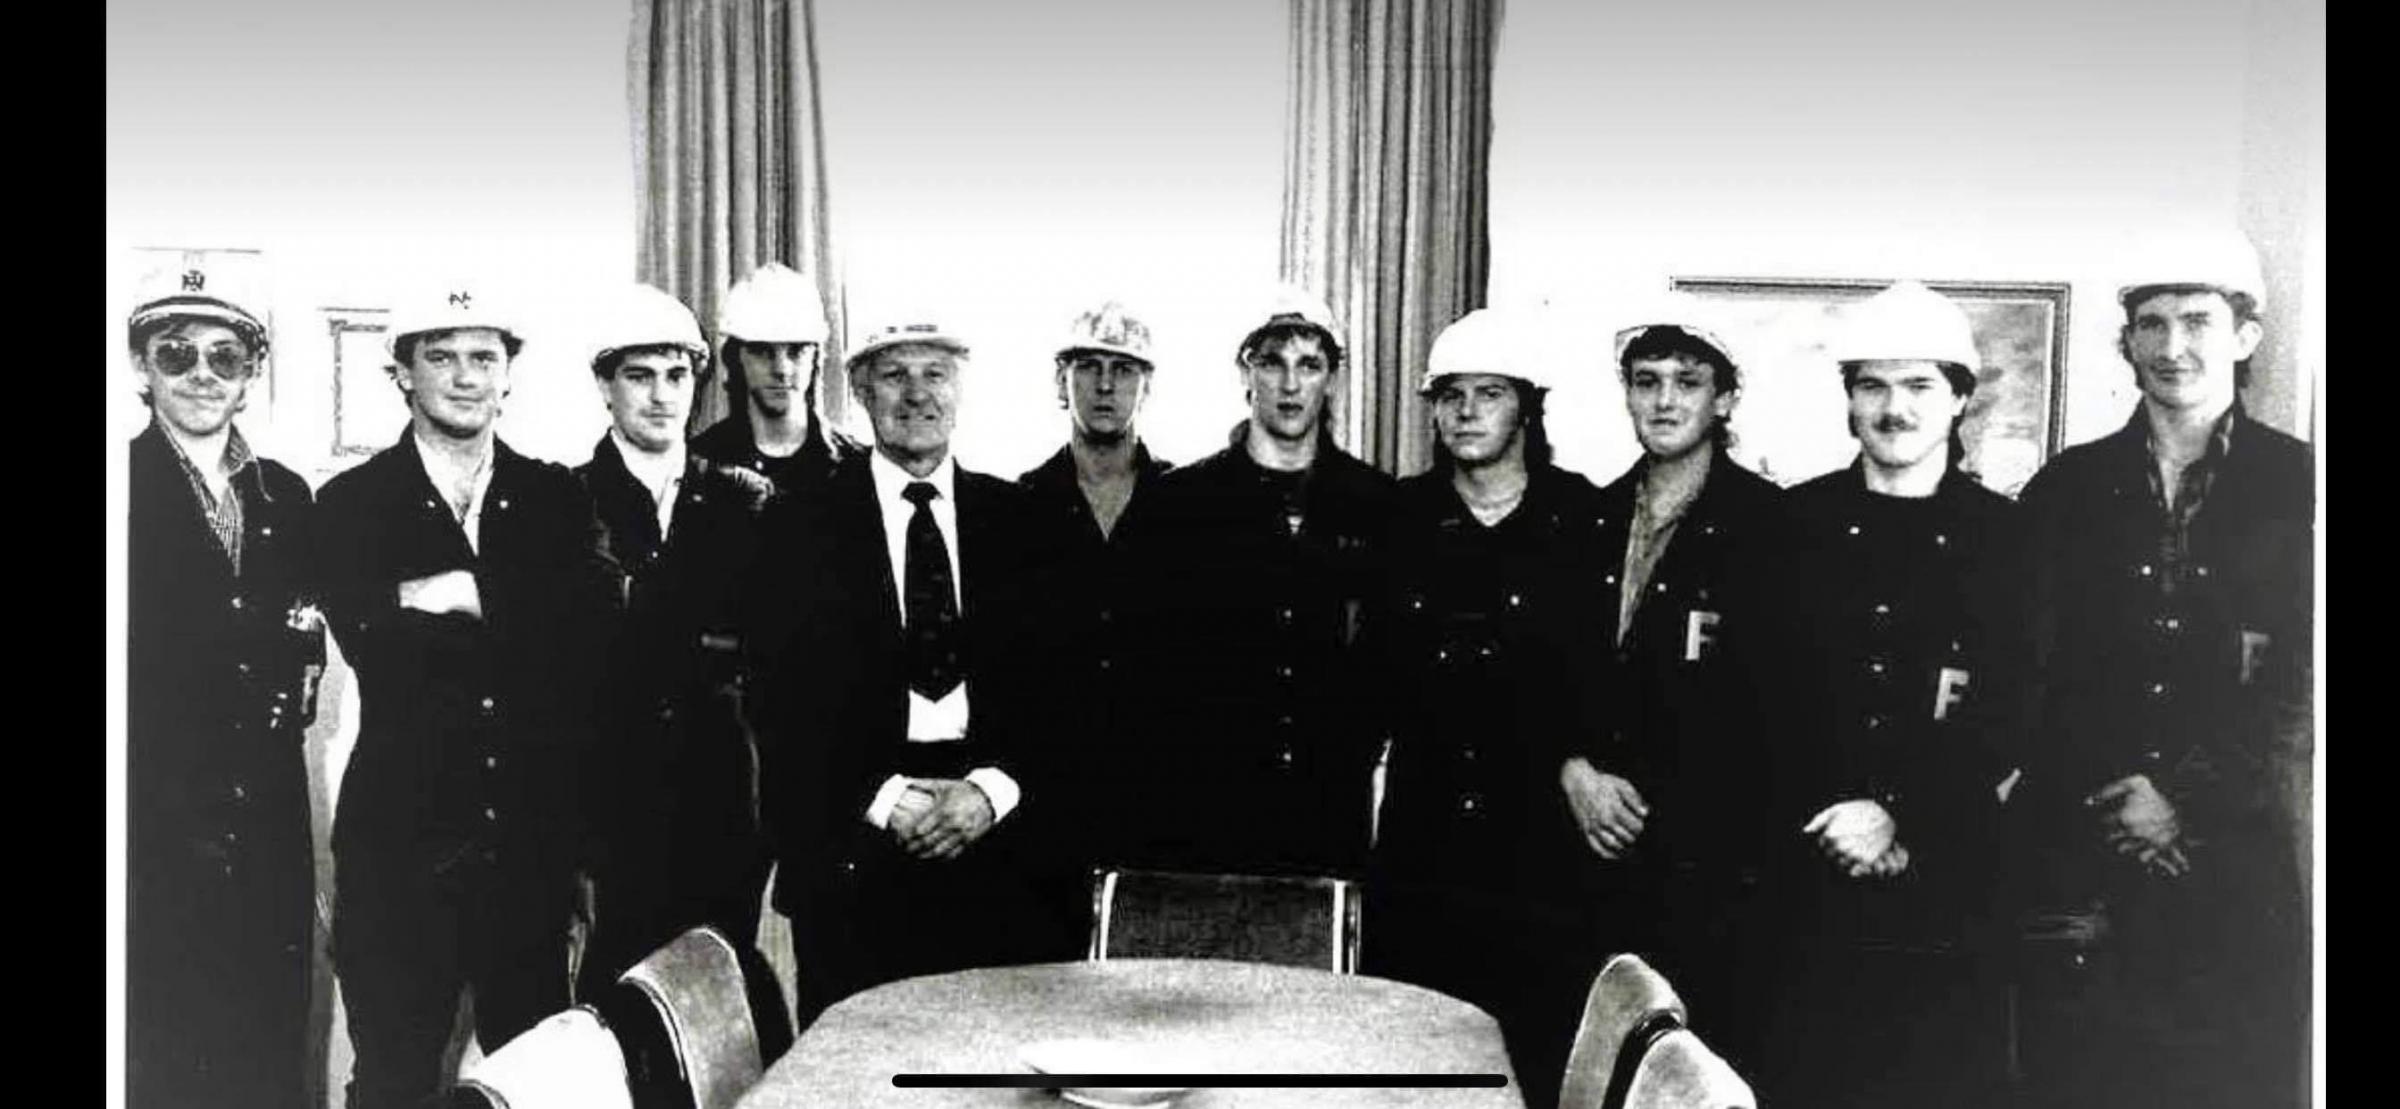 The 1981 apprentices pictured in 1985 after completing their 4 year apprenticeship with the then Training Officer, Mr Roy Timmins.